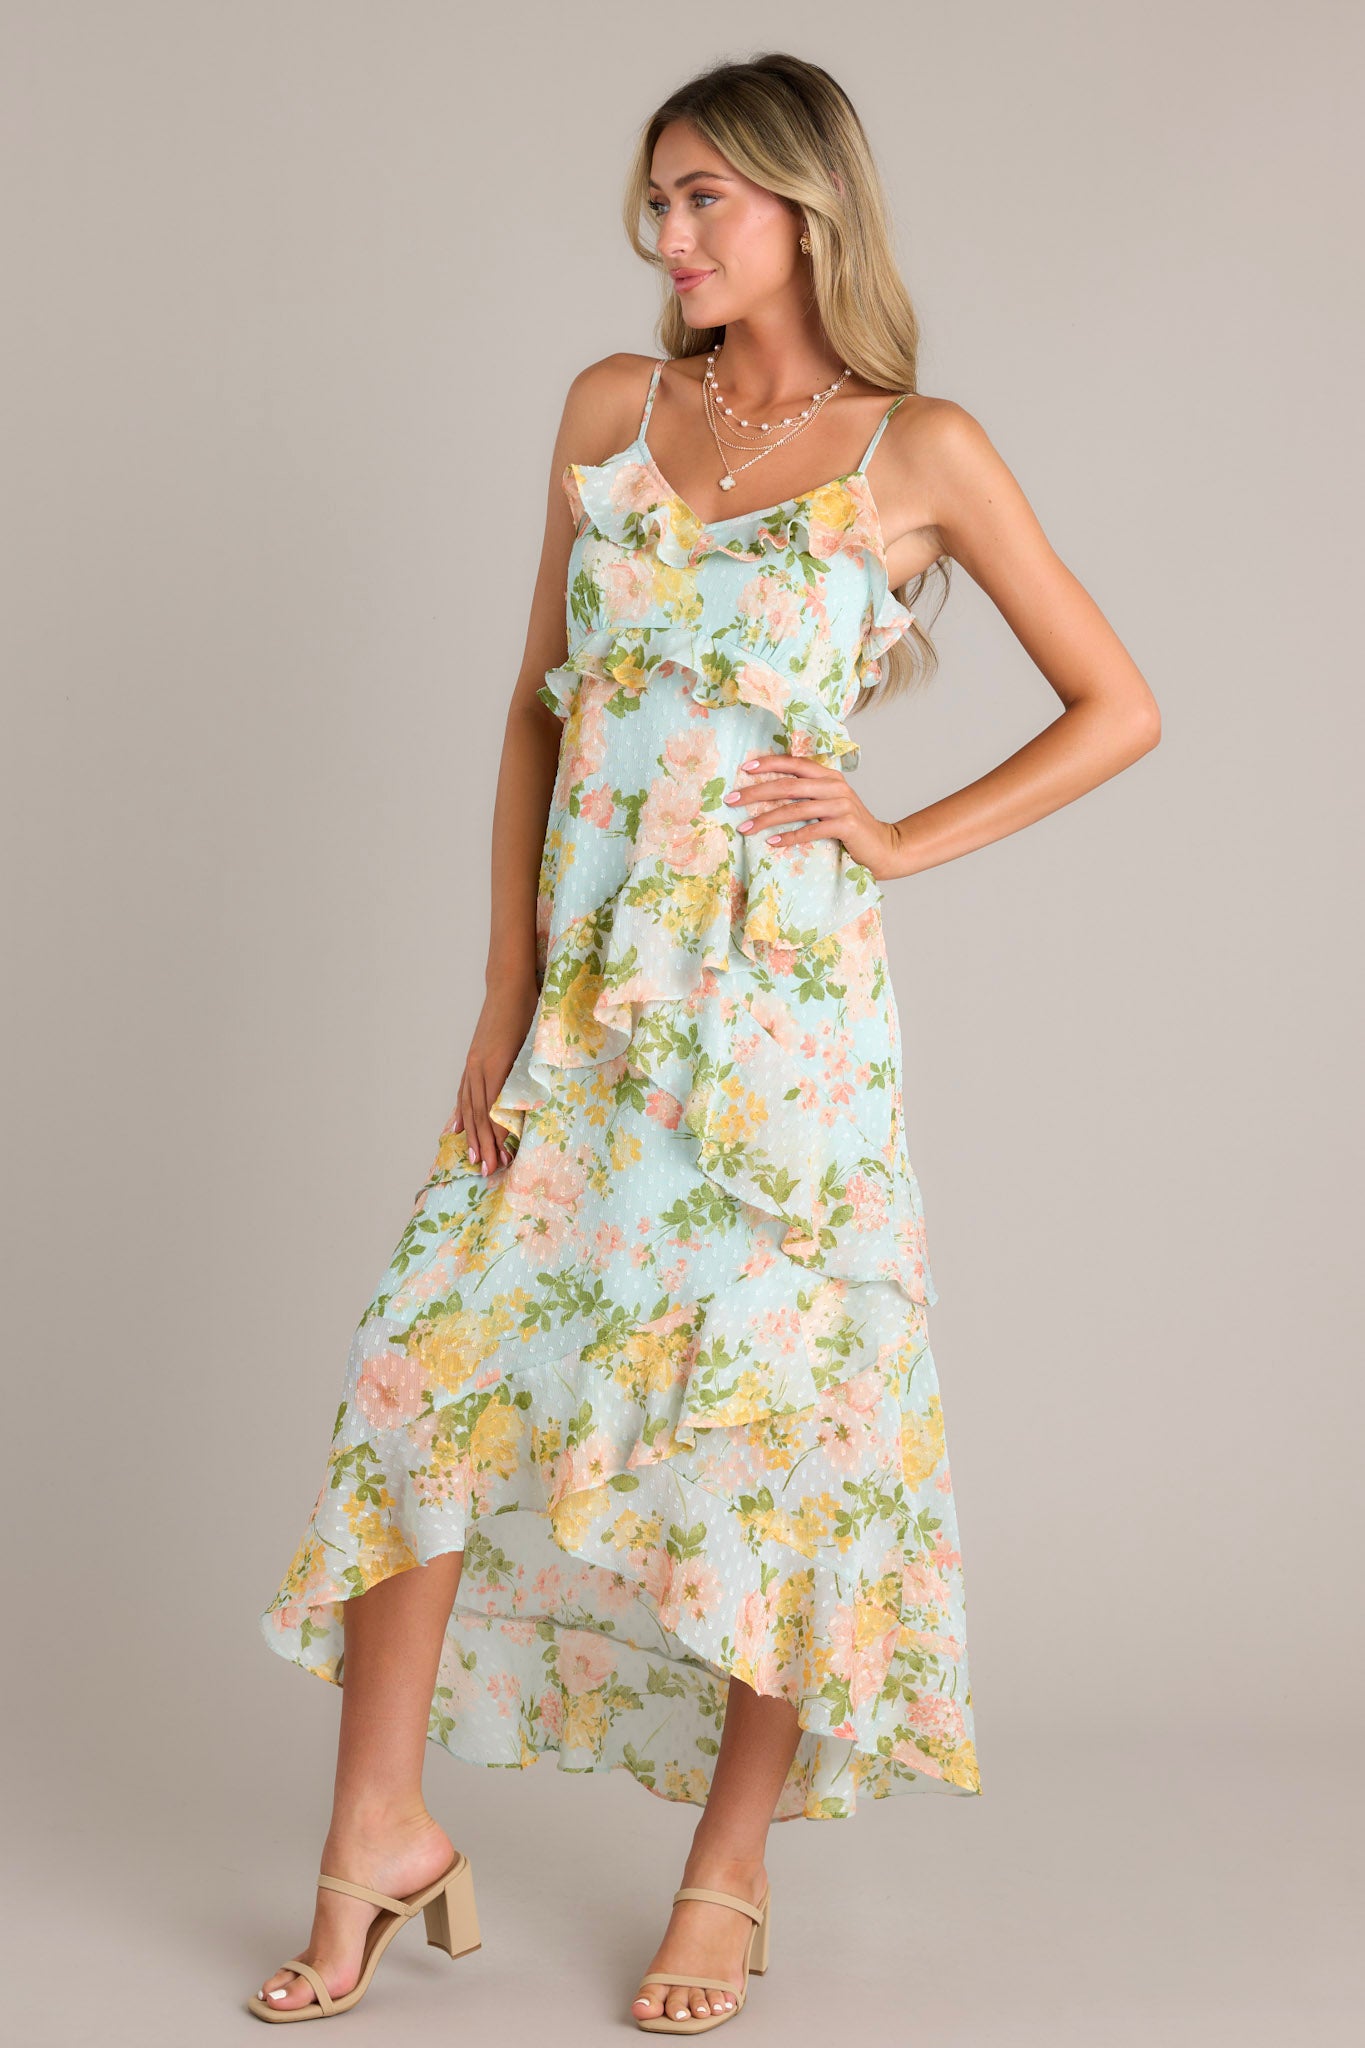 This blue floral dress features asymmetrical ruffles cascading down the dress.